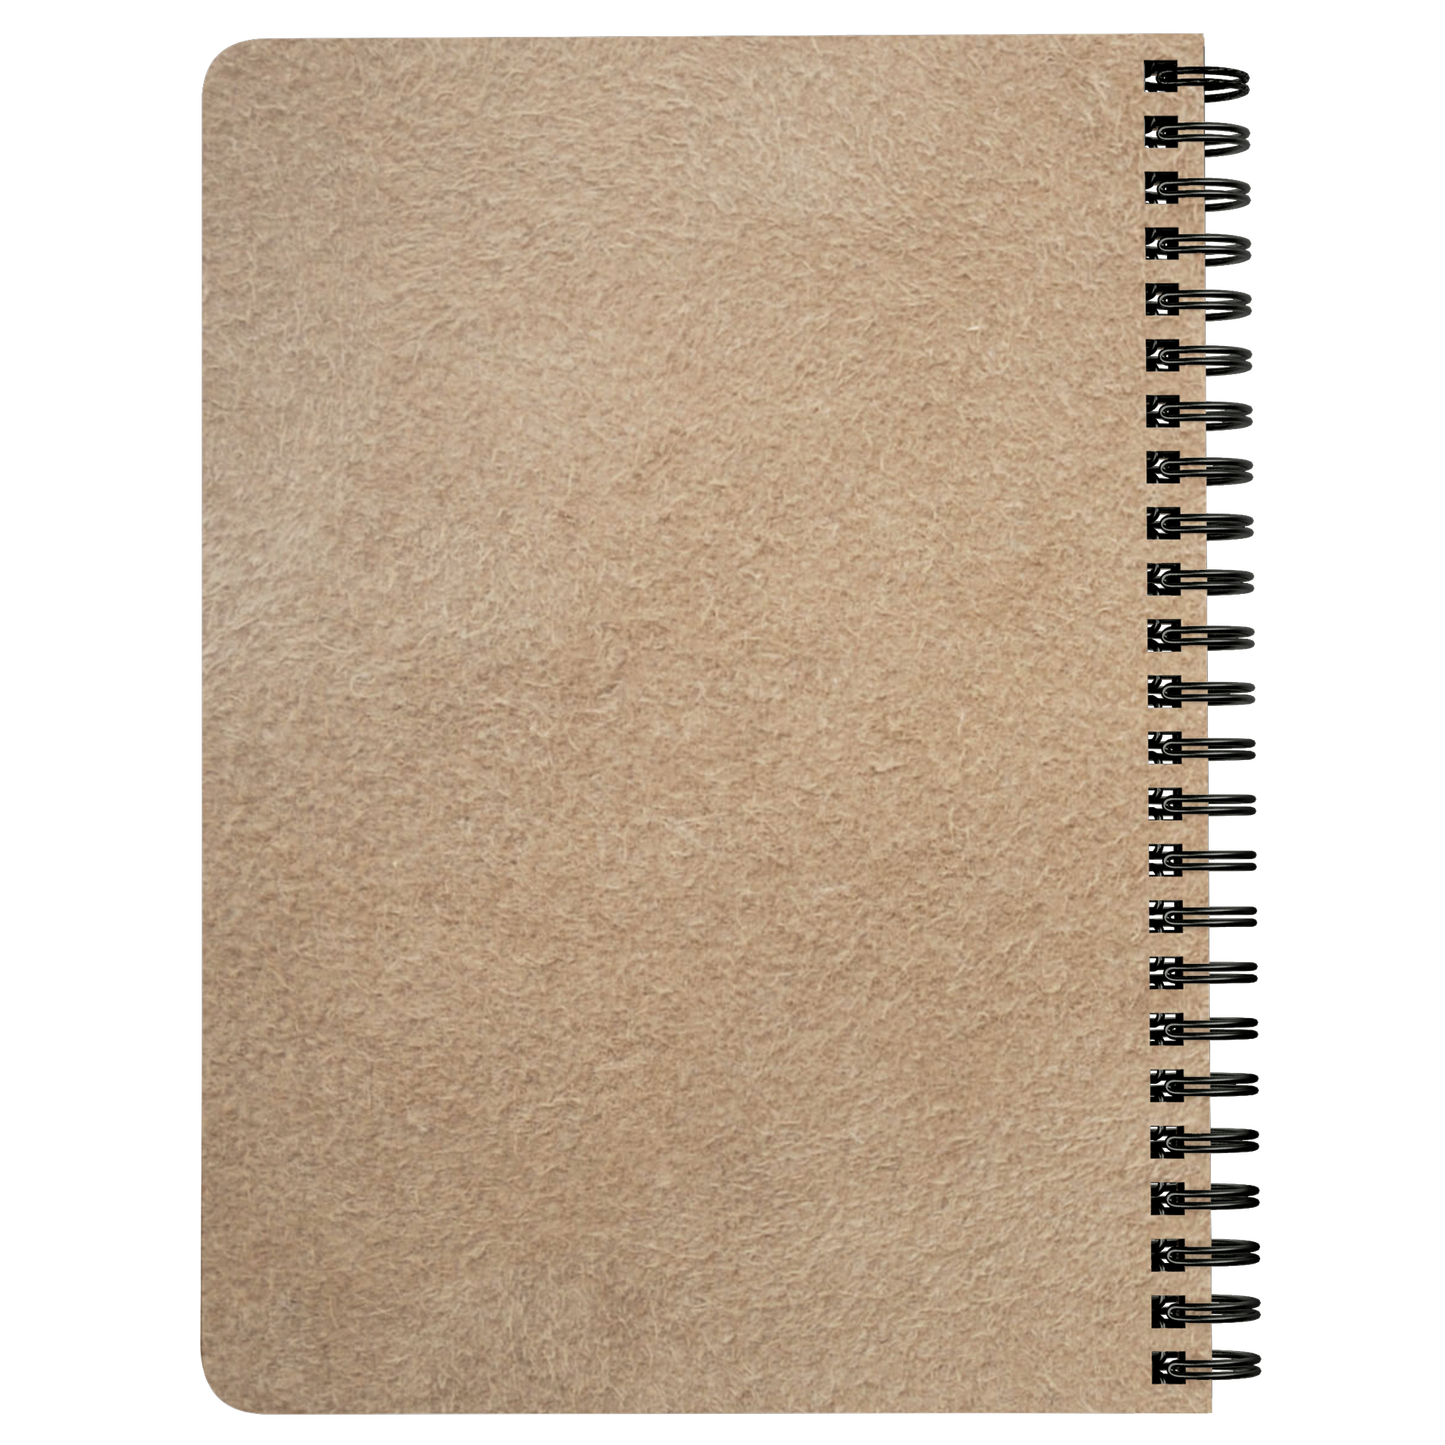 Personalize Notebook Journal Spiraled Lined Journal Notebook Diary Daybook  Daily Notebook